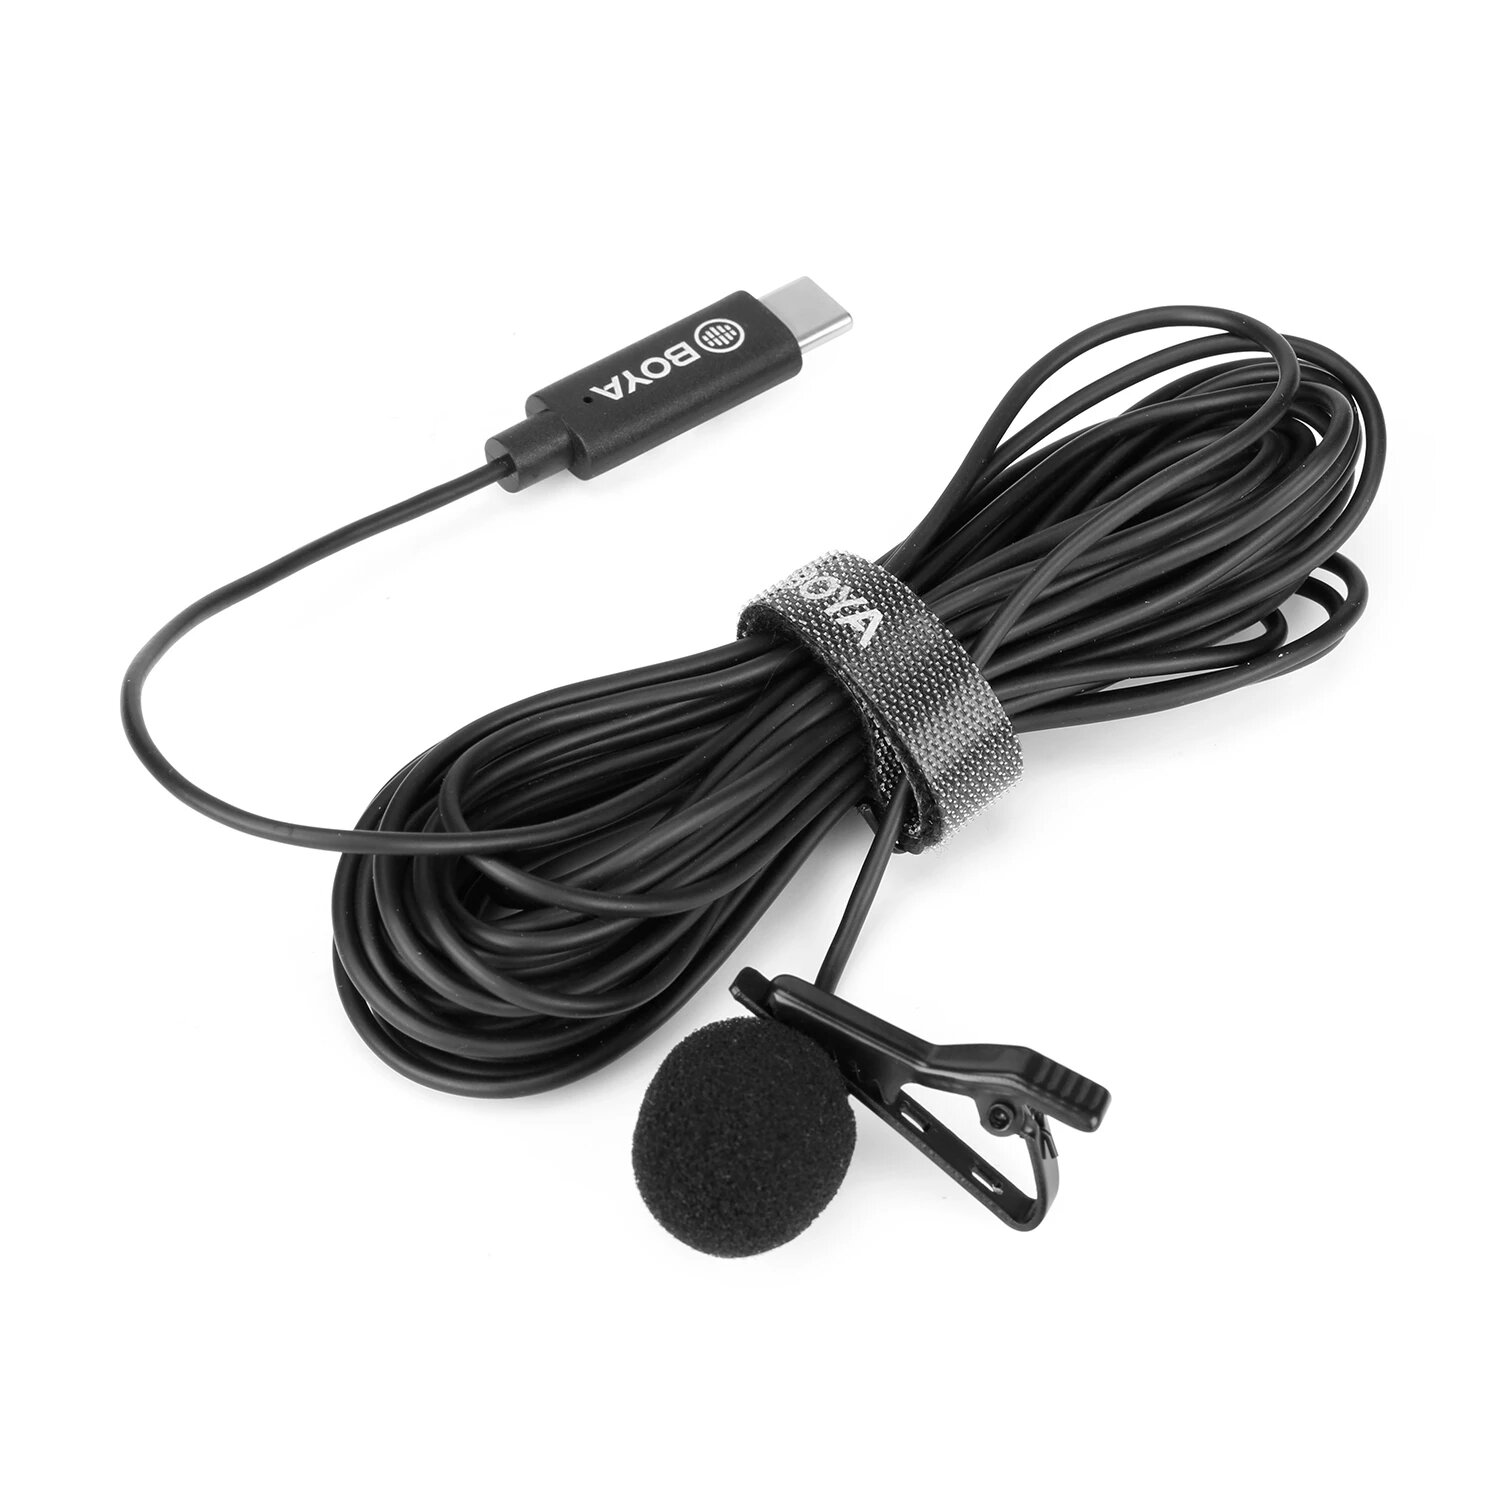 BOYA BY-M3 Lavalier Lapel Microphone Mini Mic Omnidirectional Single Head 6 Meters Cable for USB Type-C Devise Android S